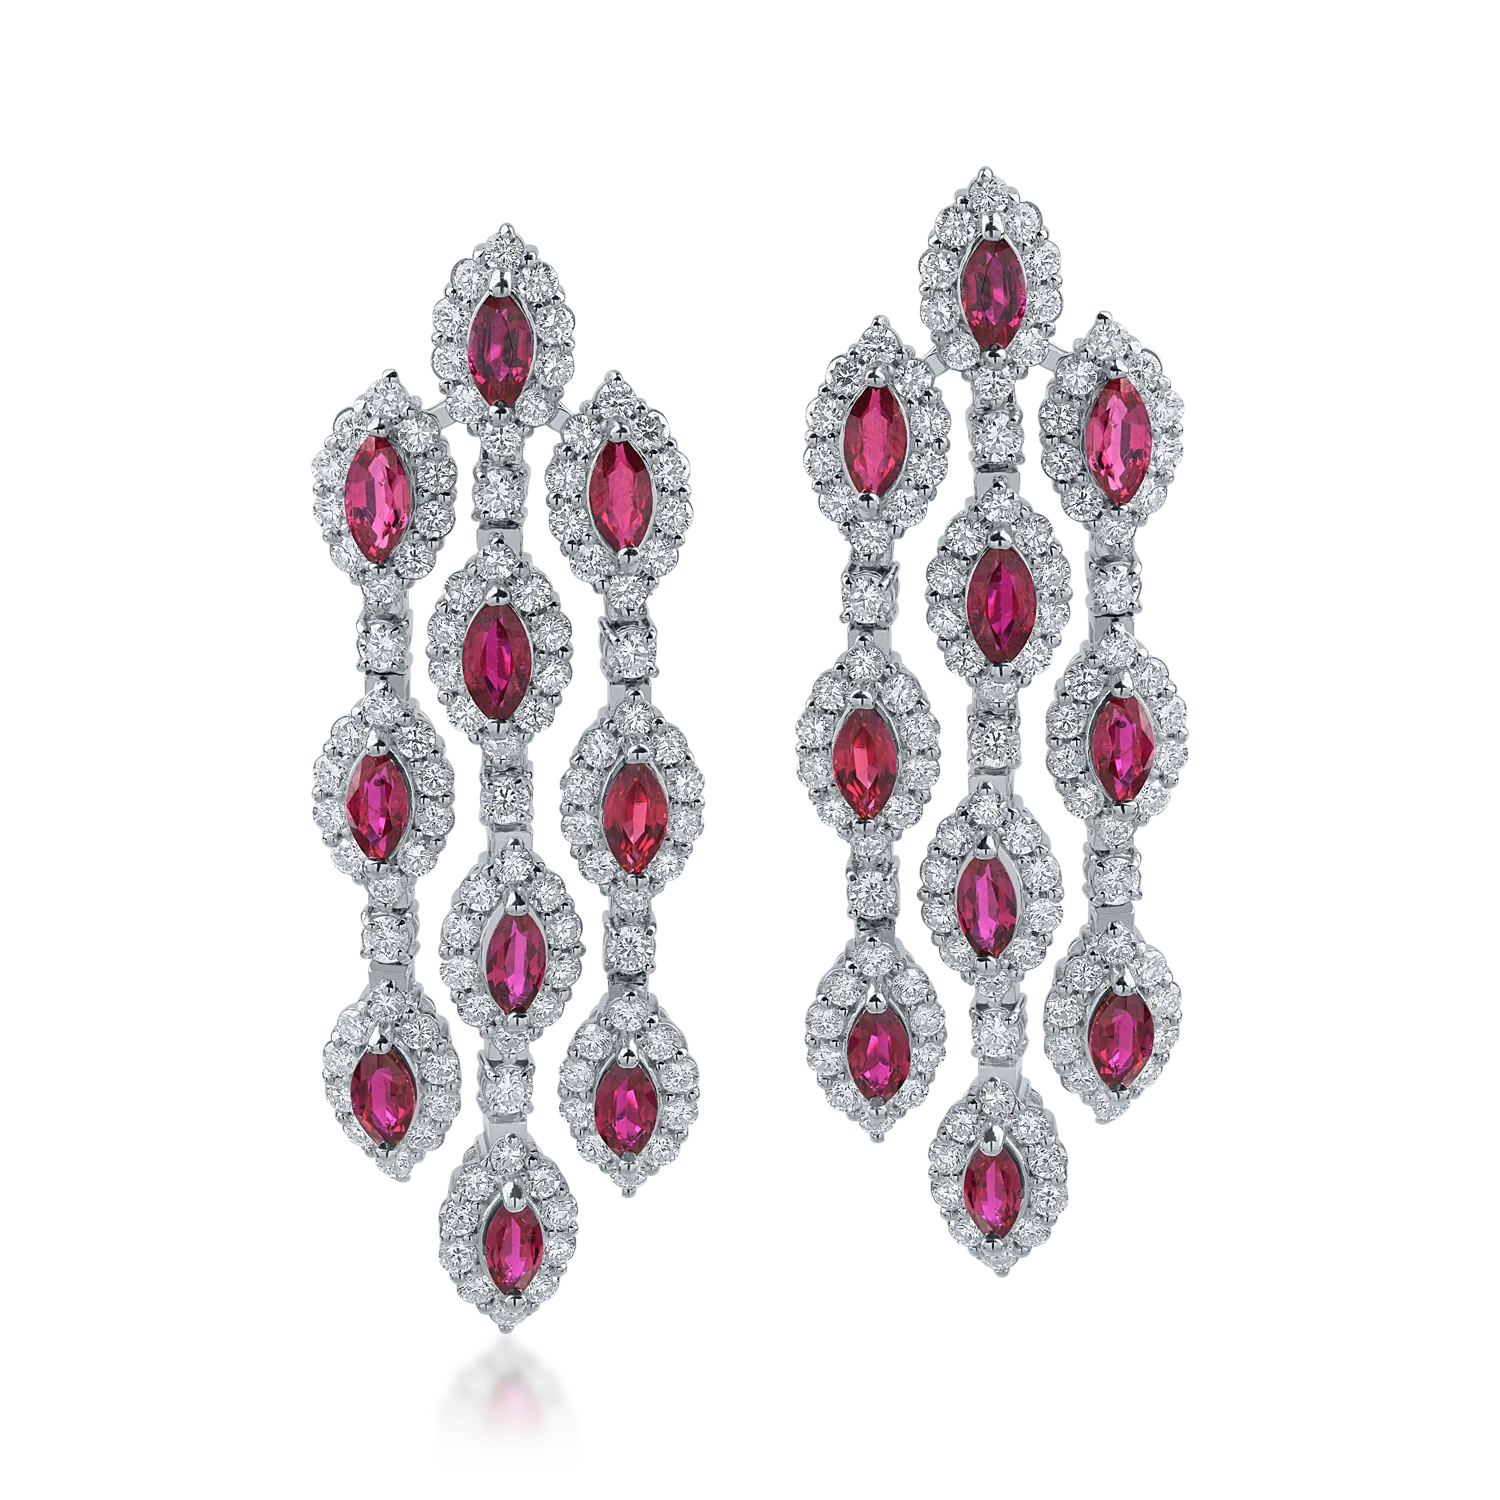 Platinum earrings with 3.27ct rubies and 3.12ct diamonds